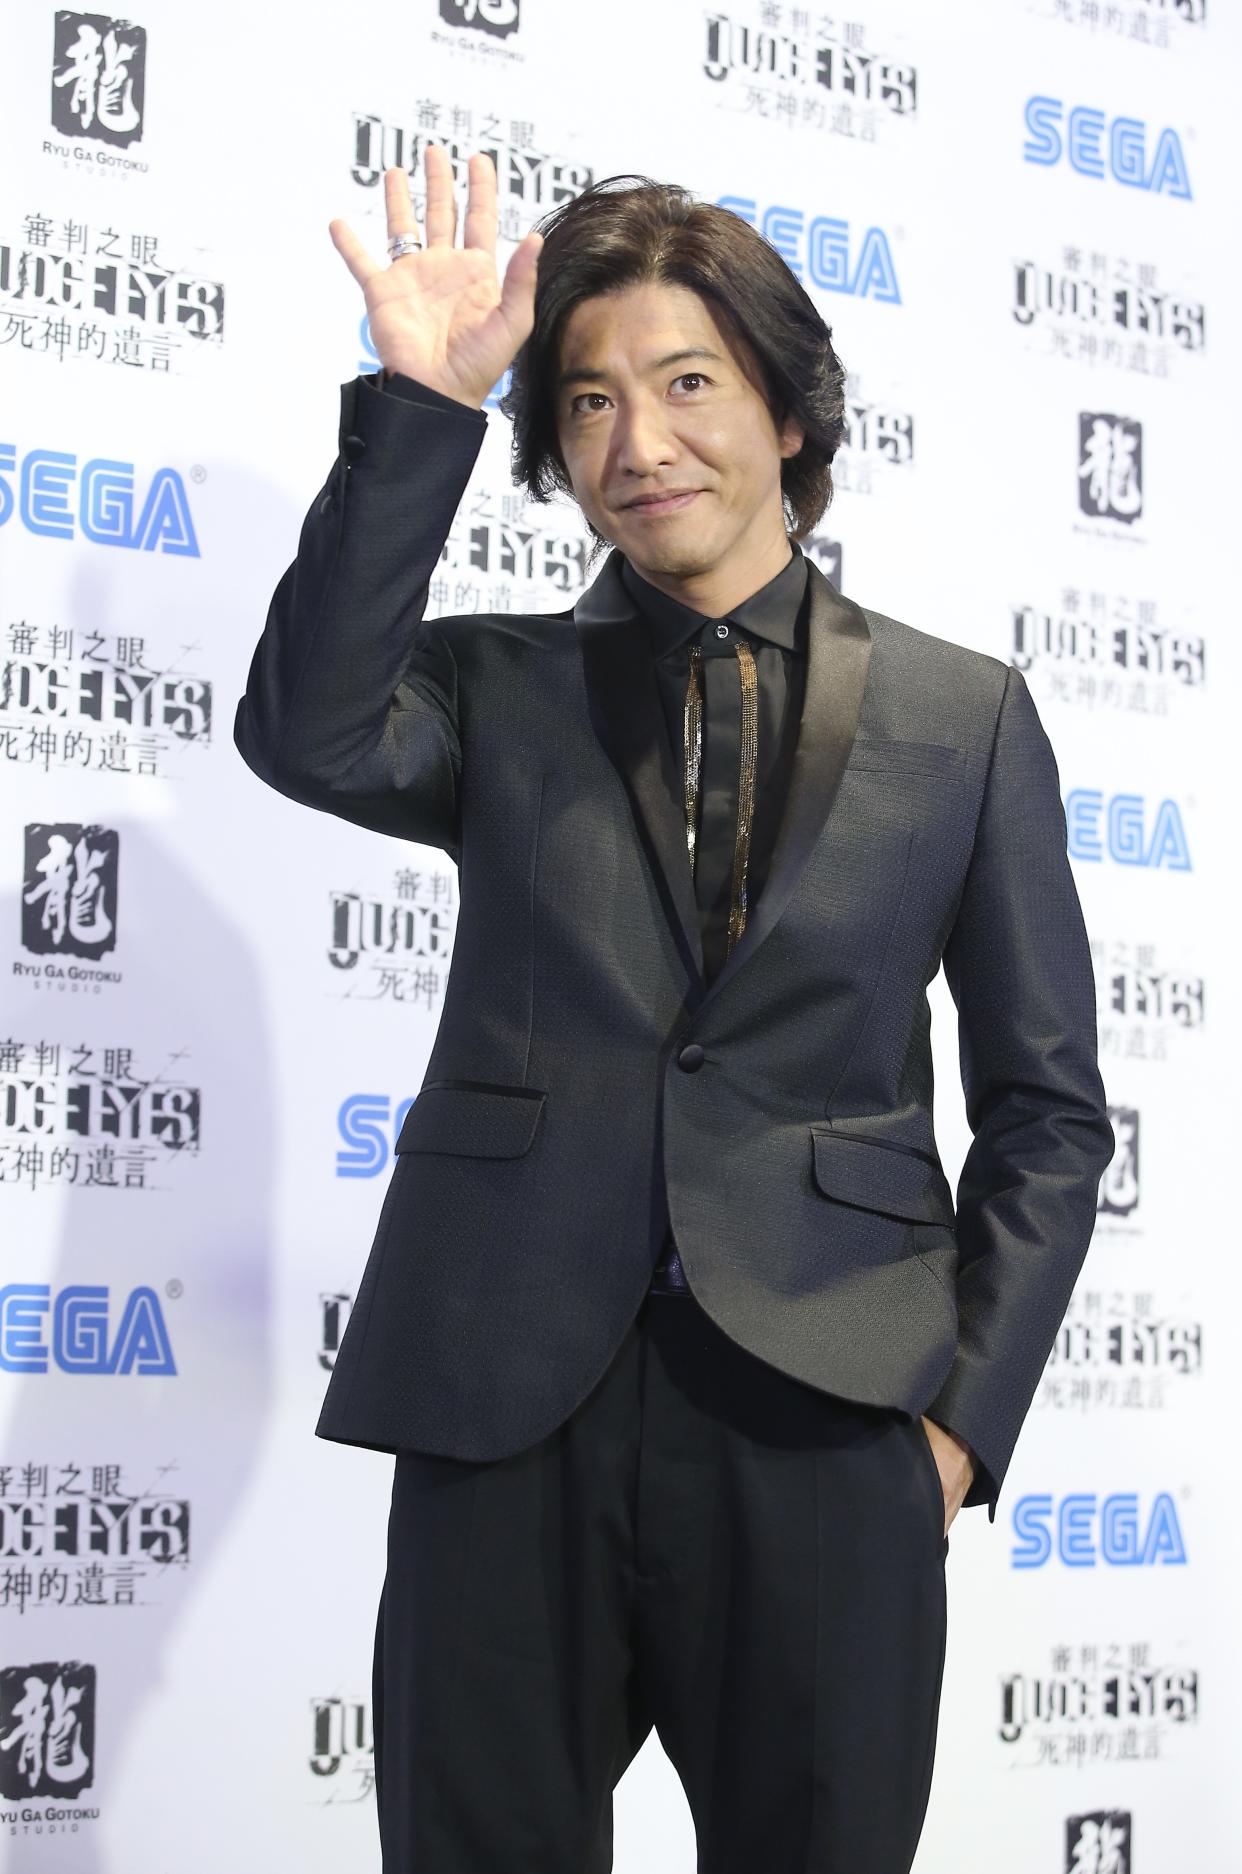 TAIPEI, CHINA - DECEMBER 02: Japanese actor Kimura Takuya attends a press conference for video game 'JUDGE EYES: Death's last words' for PS4 on December 2, 2018 in Taipei, Taiwan of China. (Photo by udn.com/Visual China Group via Getty Images)